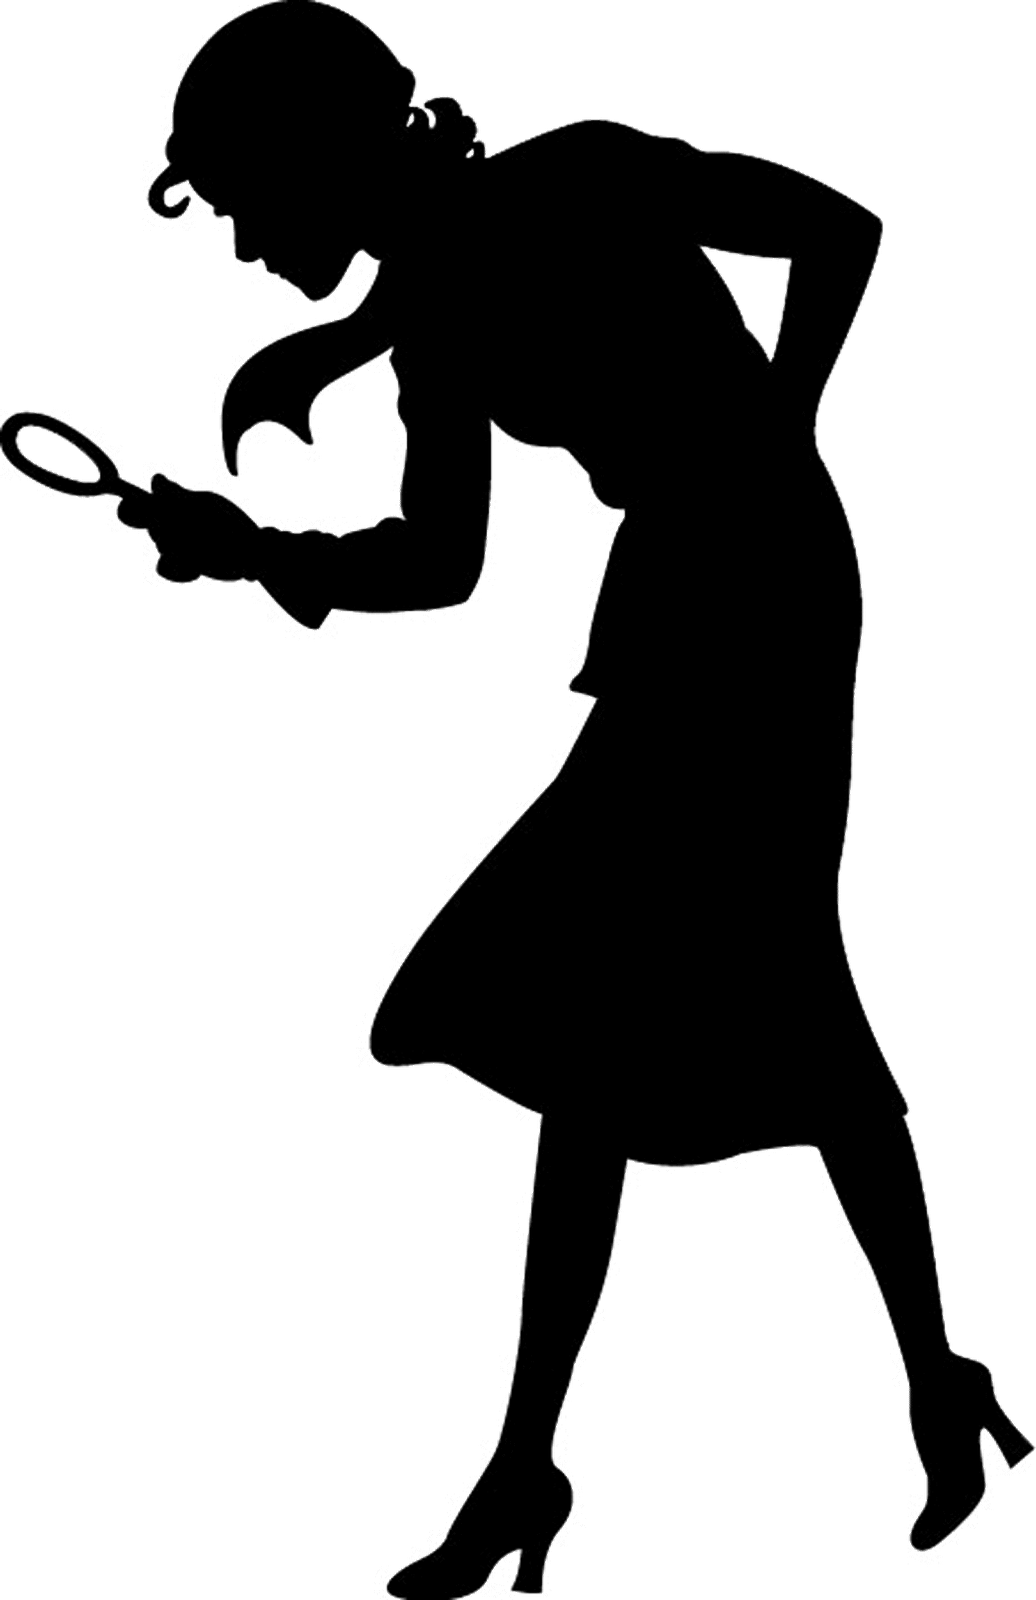 Flashlight silhouette clipart black and white 